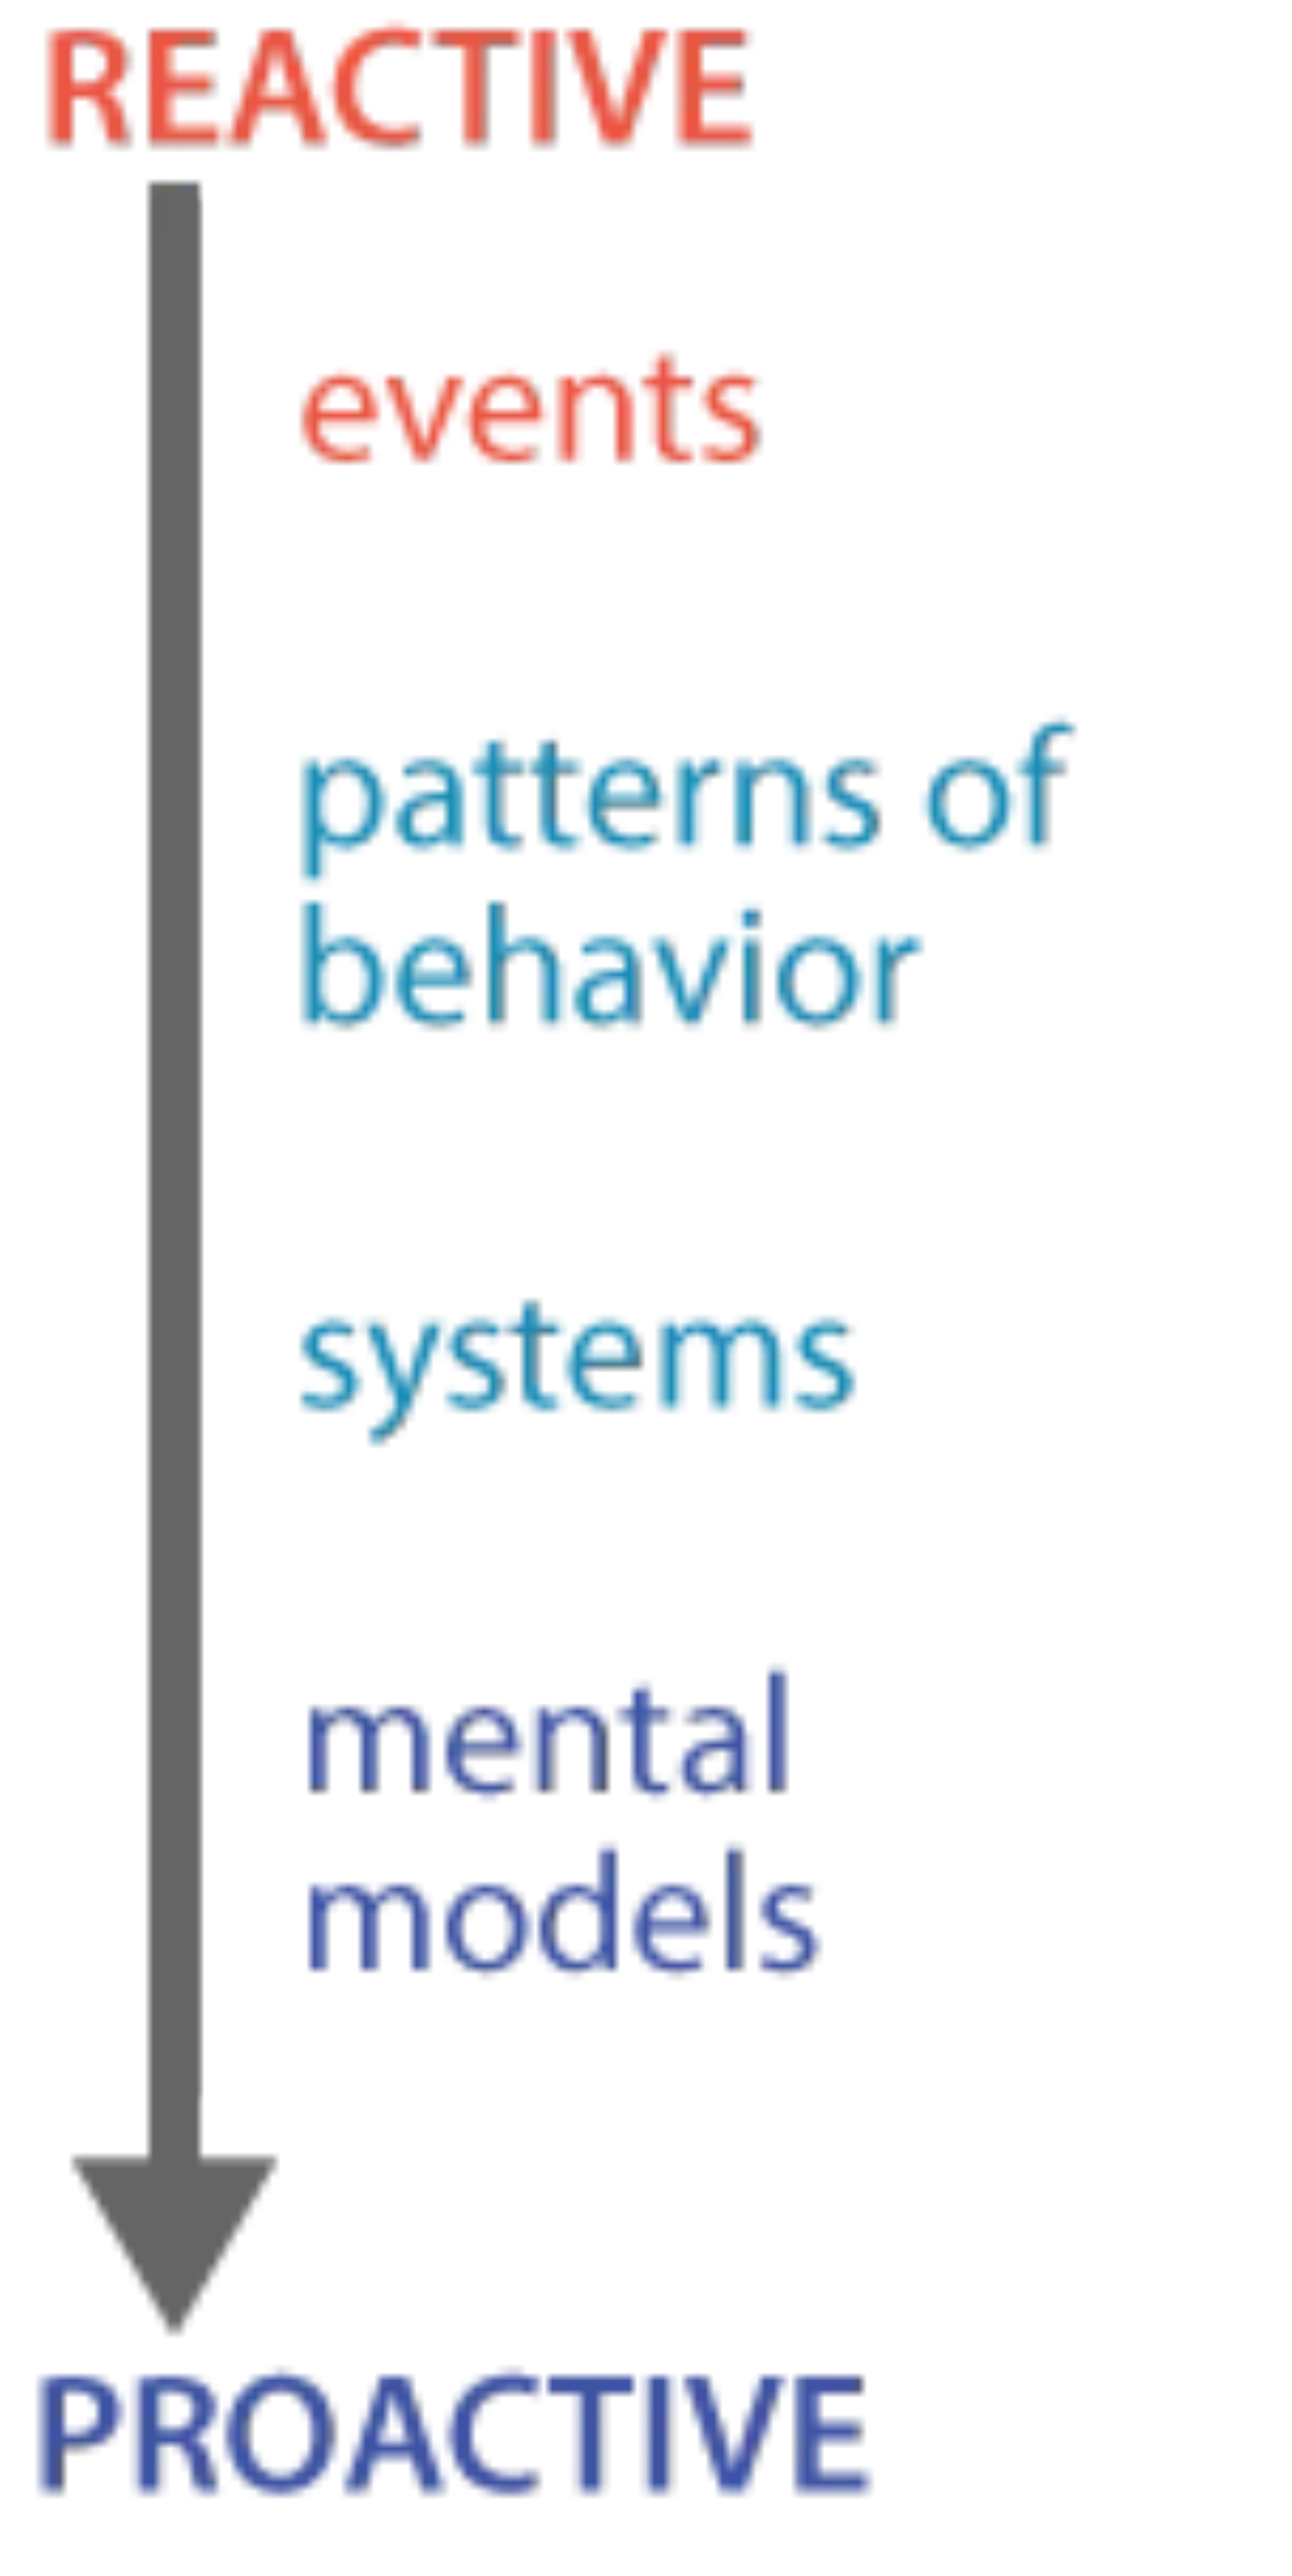 Diagram showing the hierarchy of system management: "Reactive" to "Proactive" with items in order "events", "patterns of behavior", "systems", and "mental models"